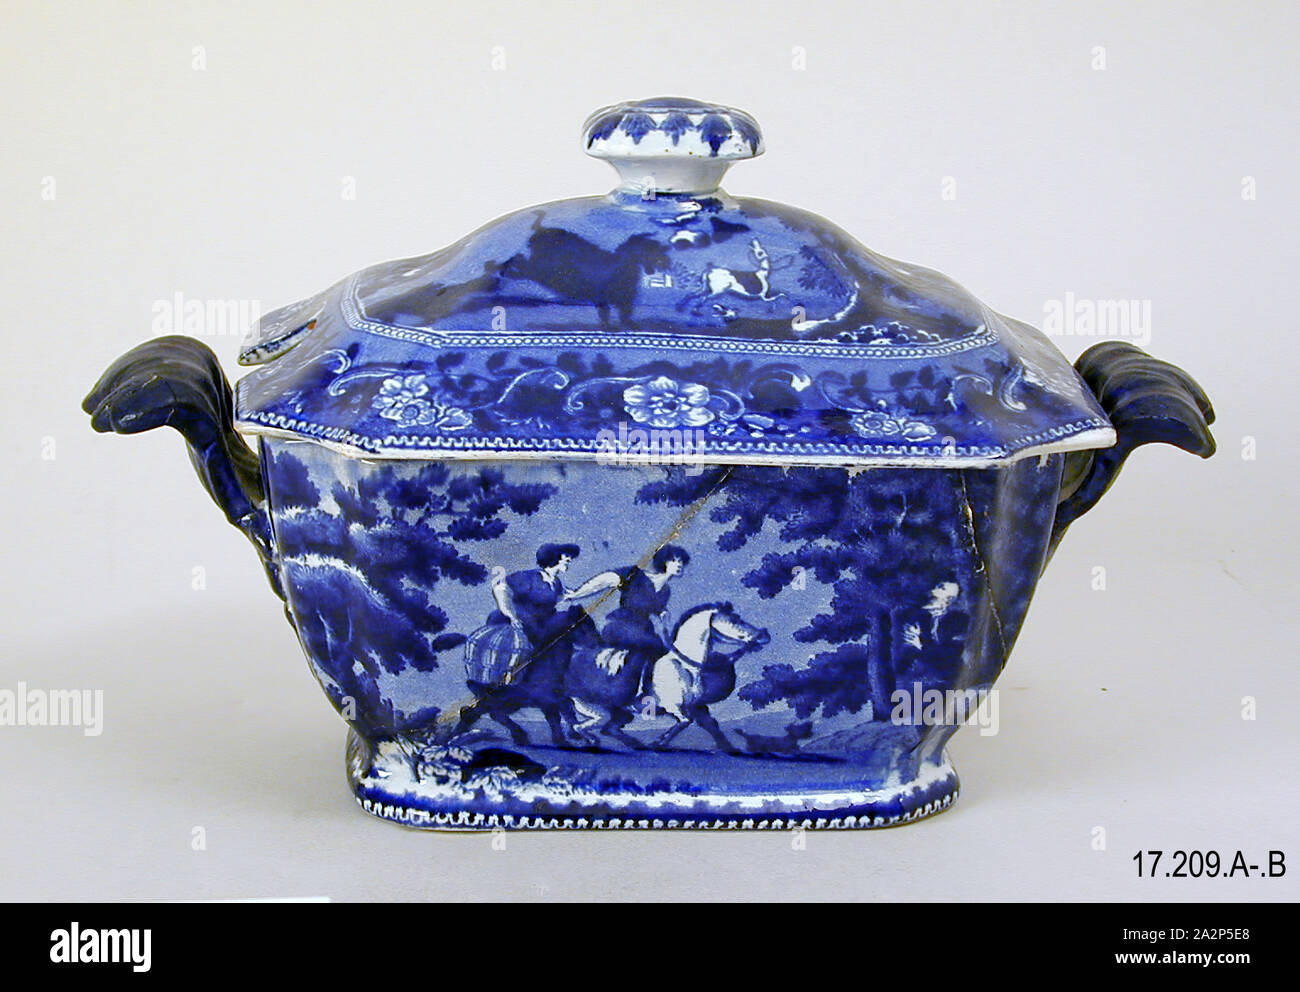 Dr. Syntax Bound to a Tree by Highwaymen; Dr. Syntax Drawing... Gravy Tureen; Dr. Syntax Pursued by a Bull Gravy Tureen Cover, 19th Century, Transfer-printed glazed earthenware, 5 3/8 x 8 3/4 x 4 1/2 in. (13.7 x 22.2 x 11.43 cm Stock Photo